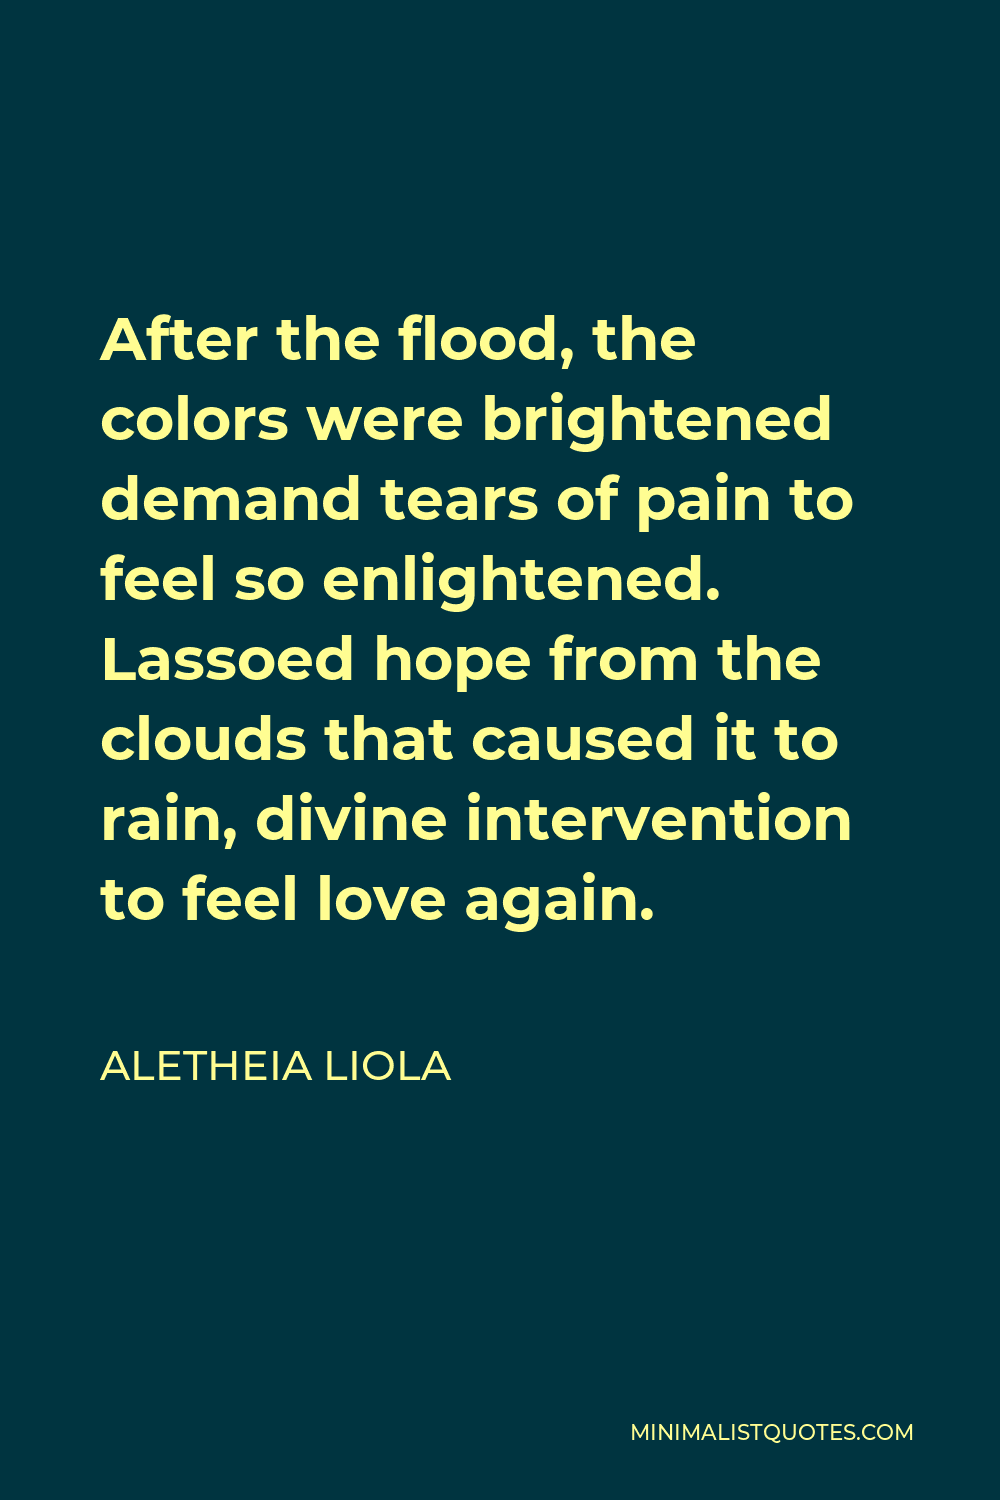 Aletheia Liola Quote - After the flood, the colors were brightened demand tears of pain to feel so enlightened. Lassoed hope from the clouds that caused it to rain, divine intervention to feel love again.